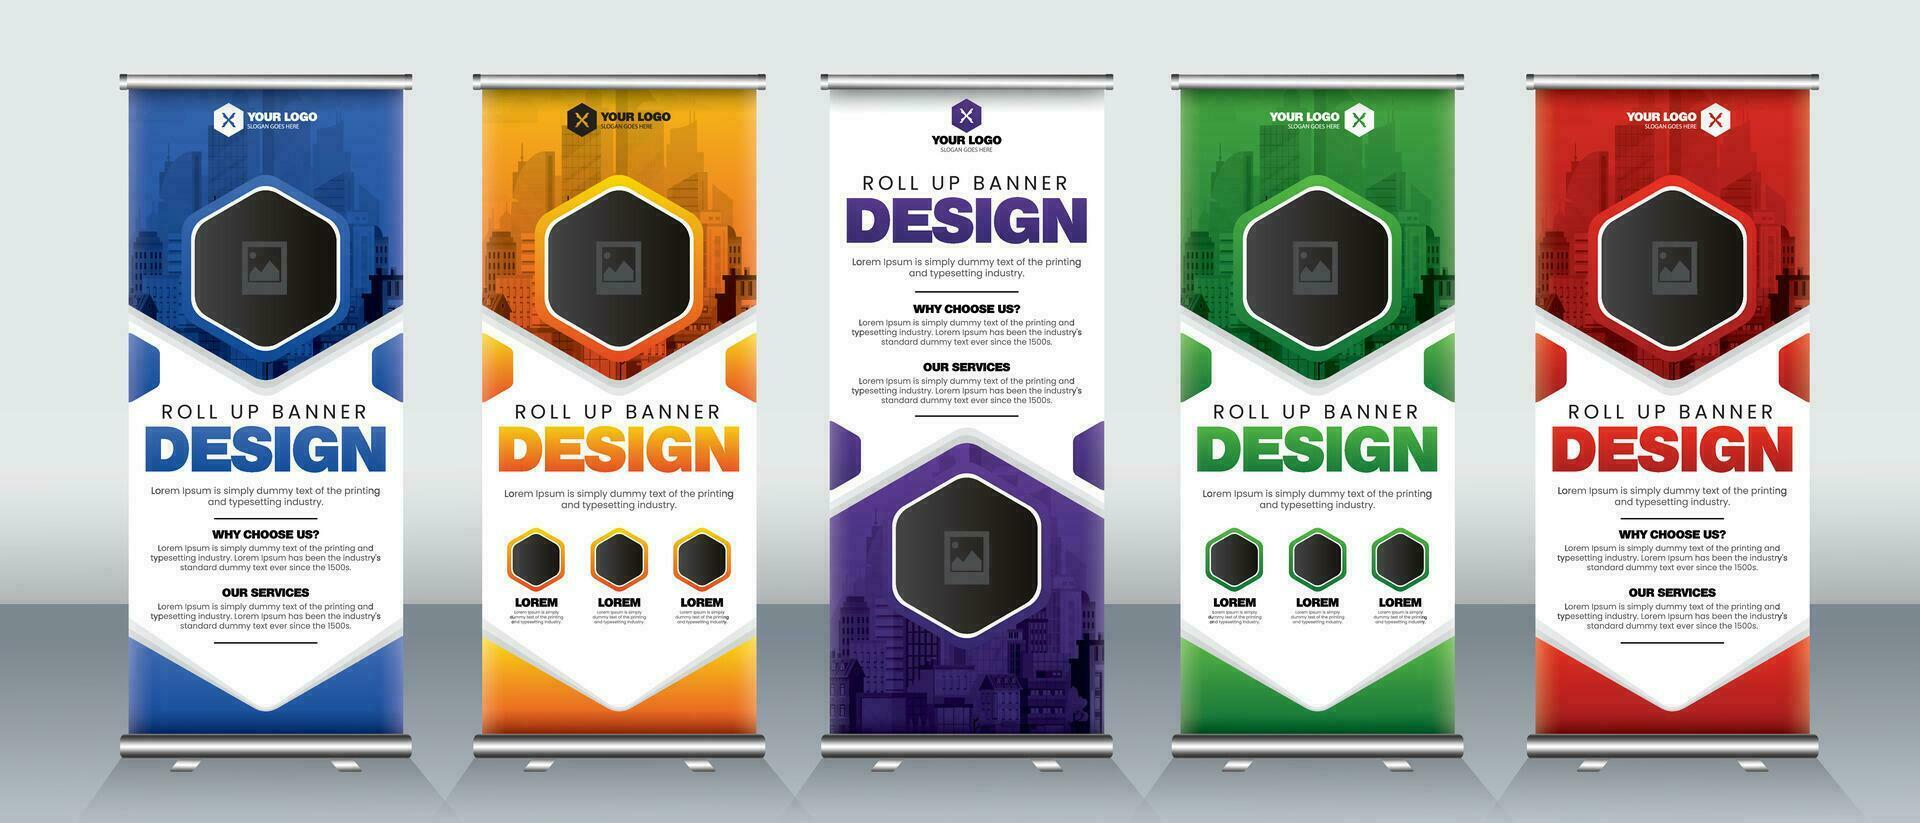 roll up banner design for business events, presentations, meeting events, billboards, x banners, x stands for red, orange, purple, green, blue colors vector